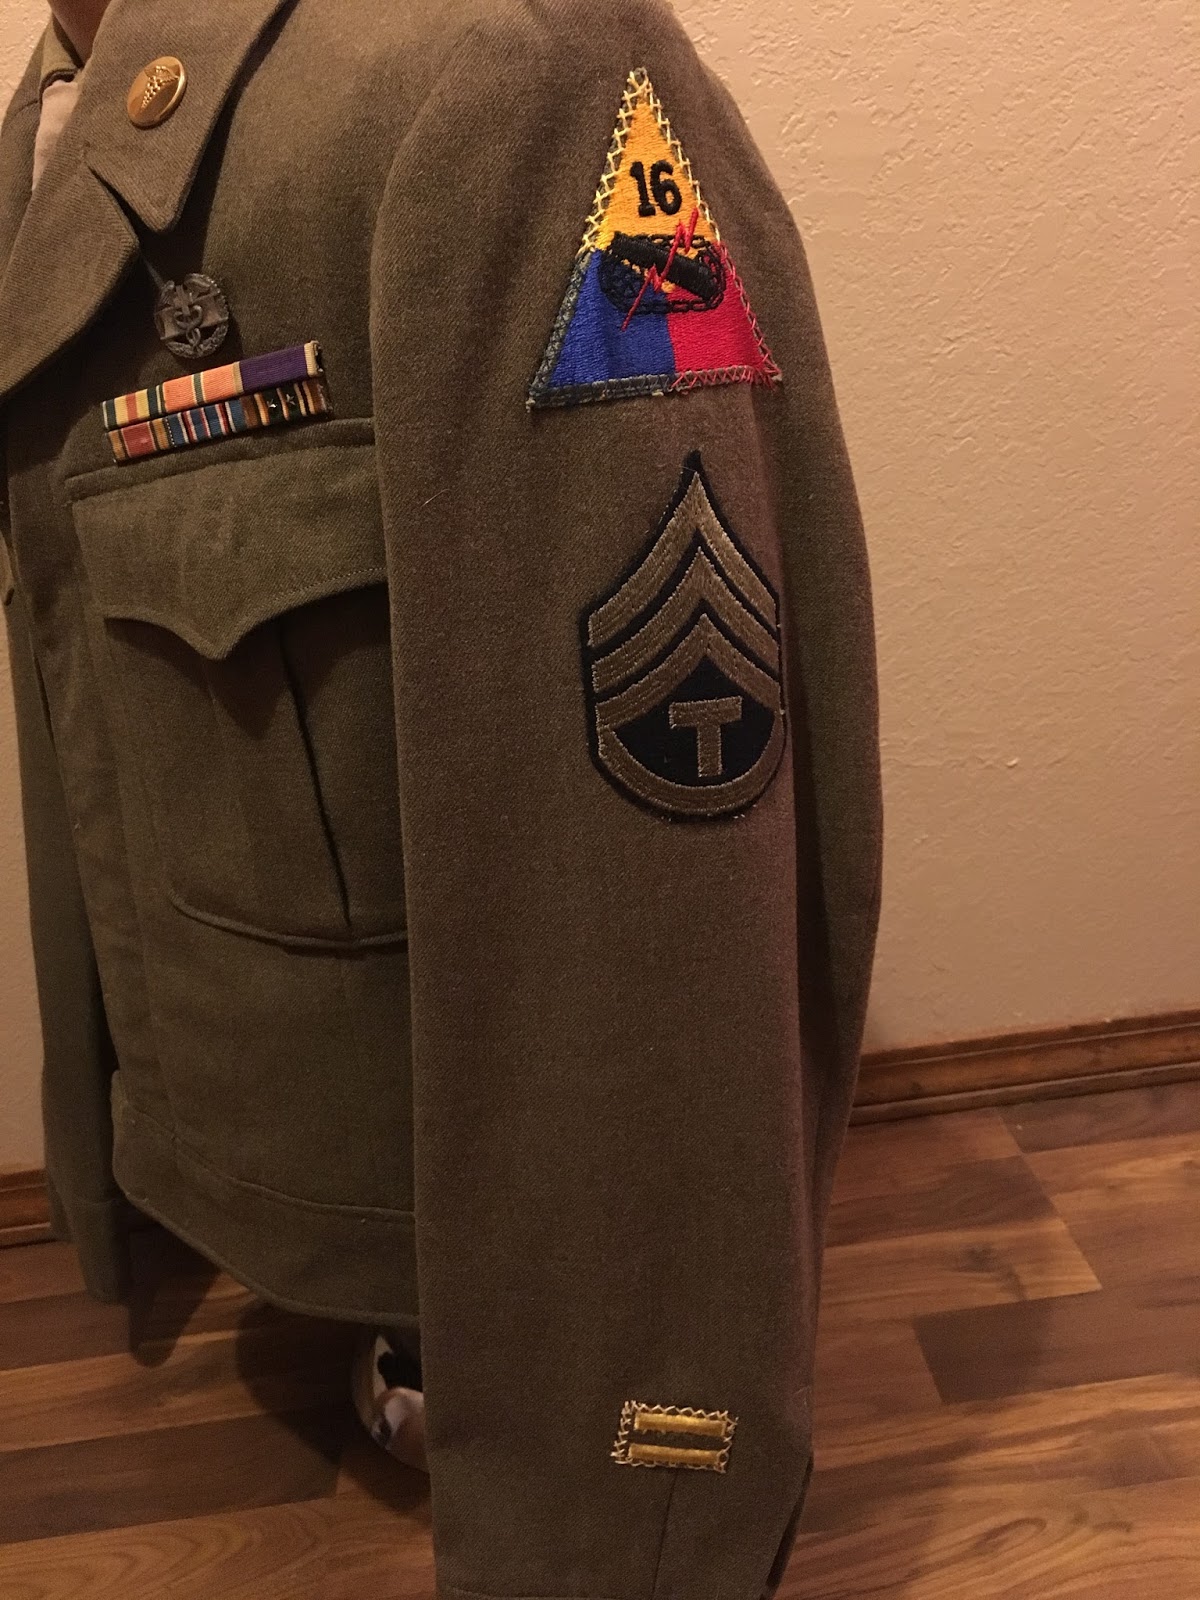 Highly Decorated 102nd Division Combat Medic Uniform! Silver Star ...